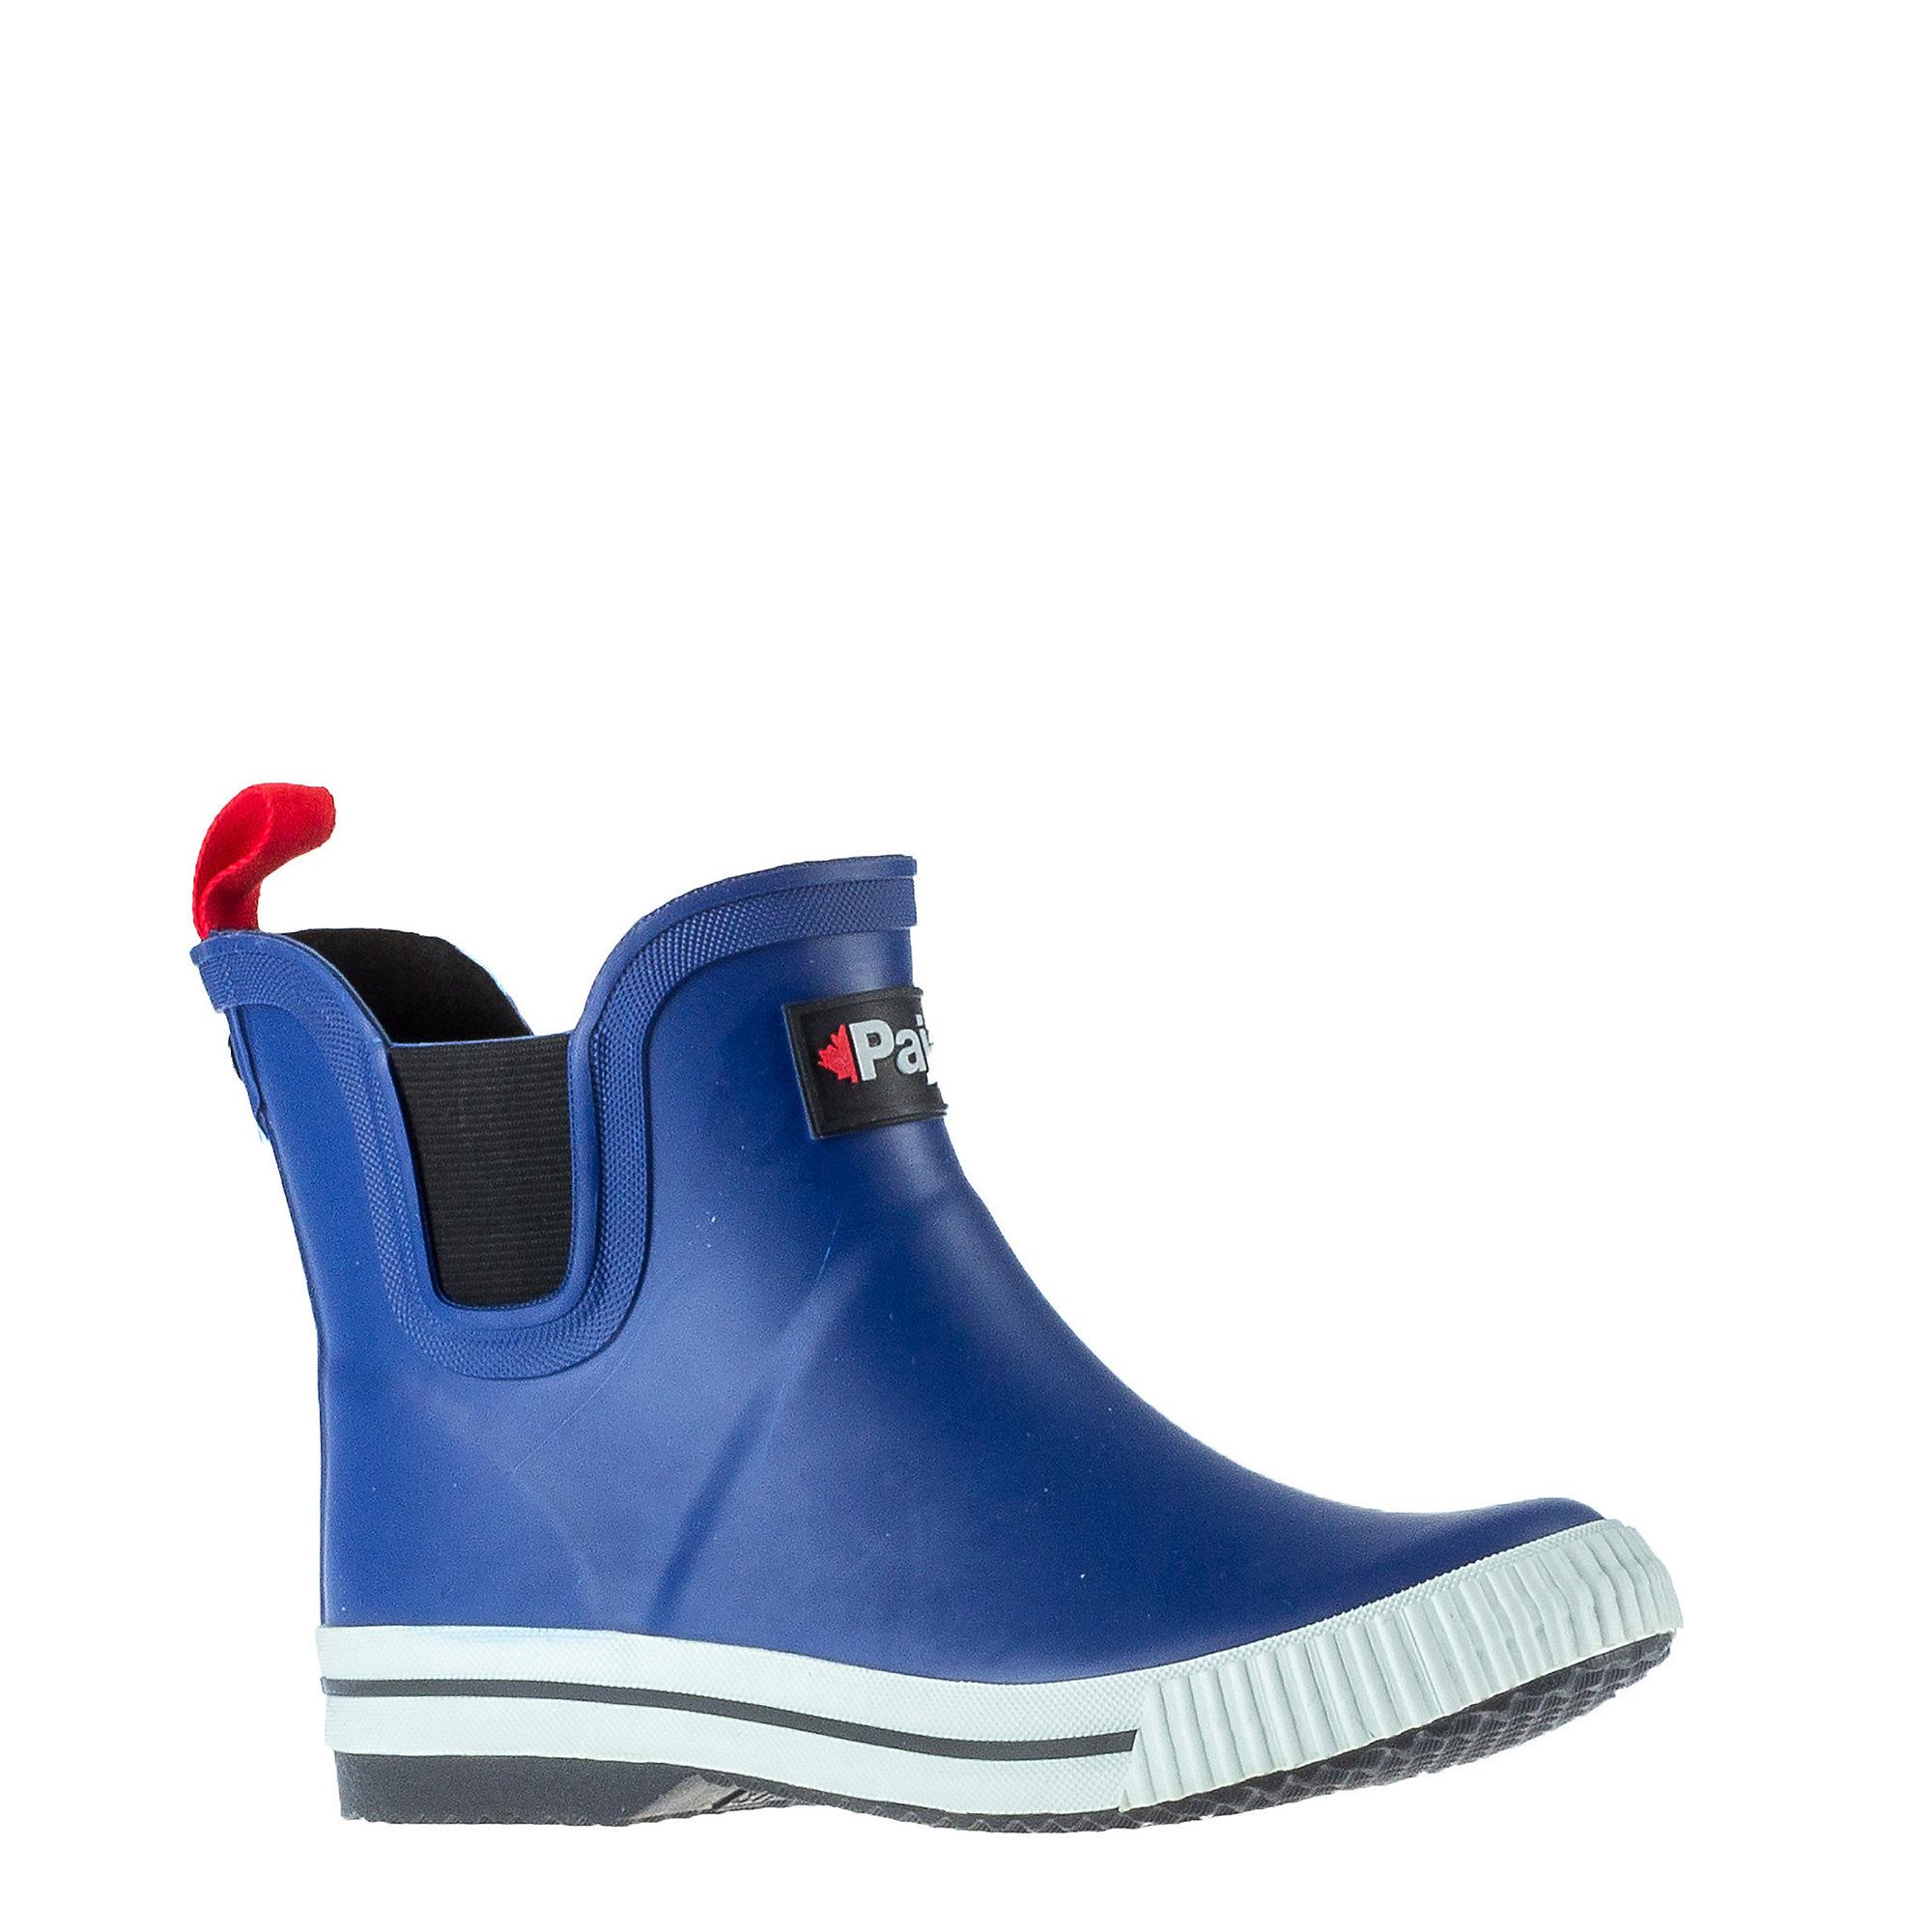 Pajar Rubber Tina Boot in Blue - Save 11% - Lyst